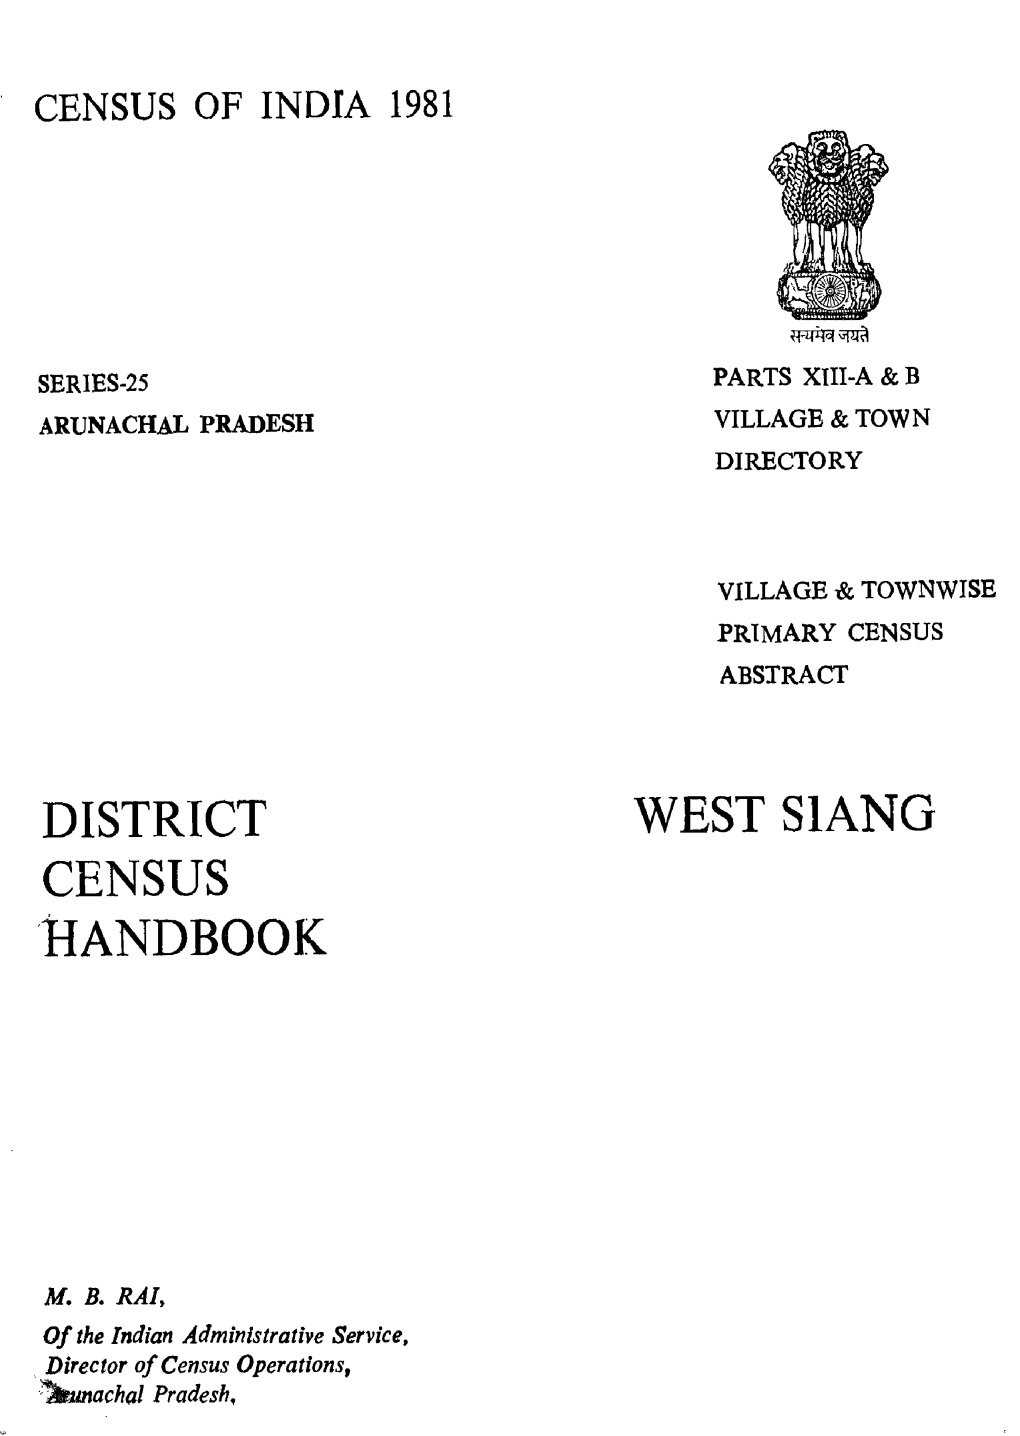 District Census Handbook, West Siang, Part XIII-A & B, Series-25